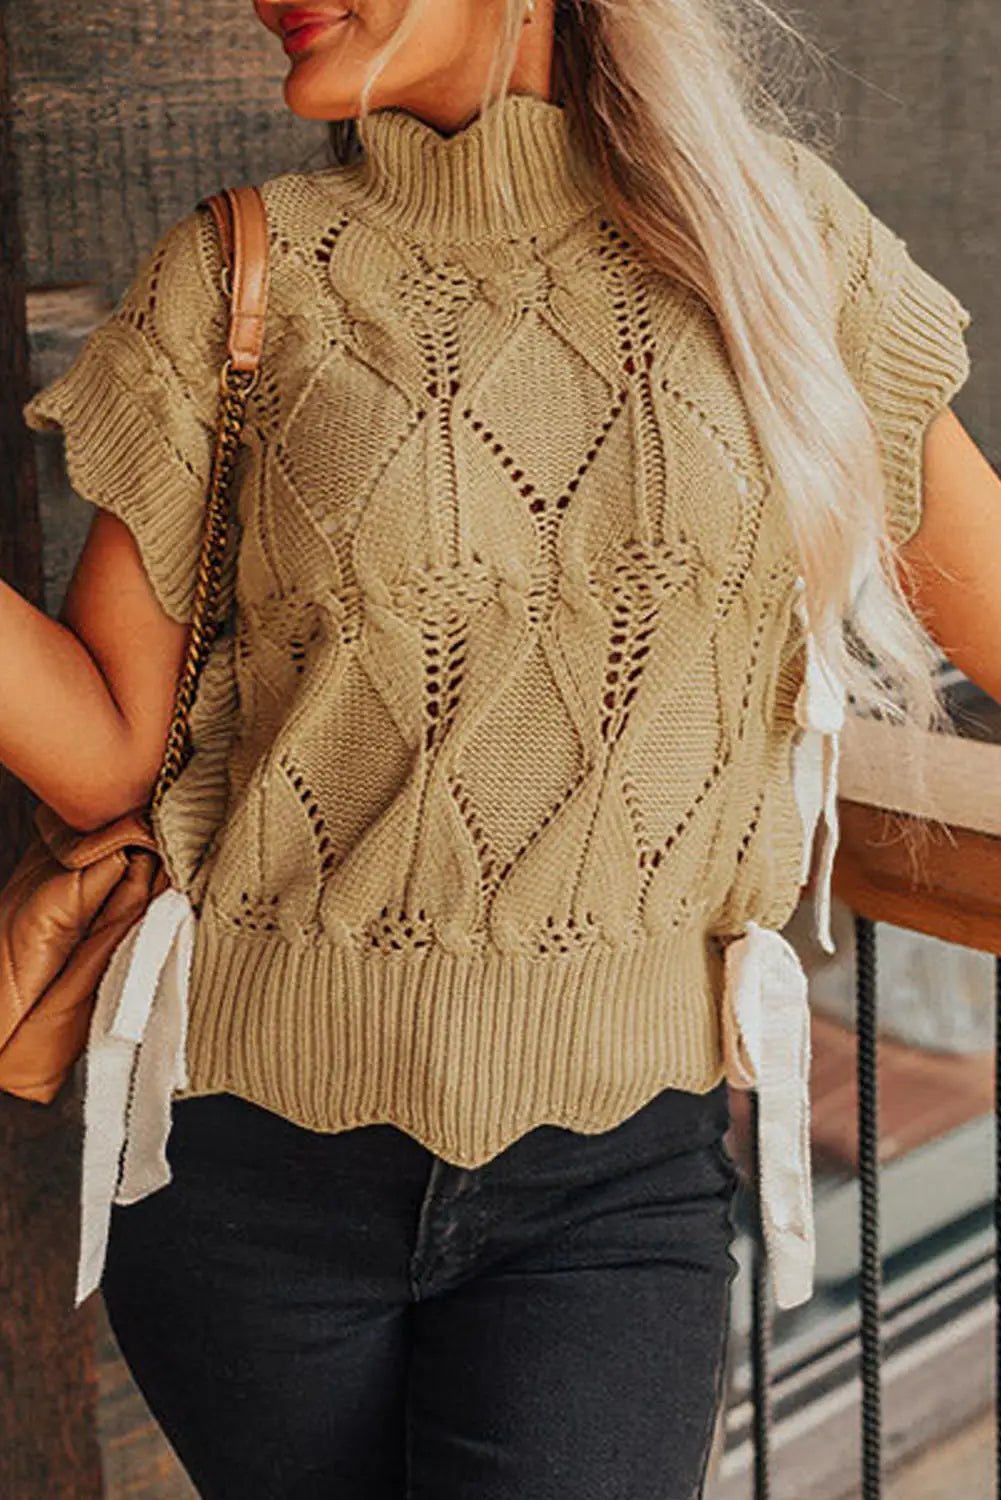 Light french beige high neck sweater - l / 60% cotton + 40% acrylic - sweaters & cardigans